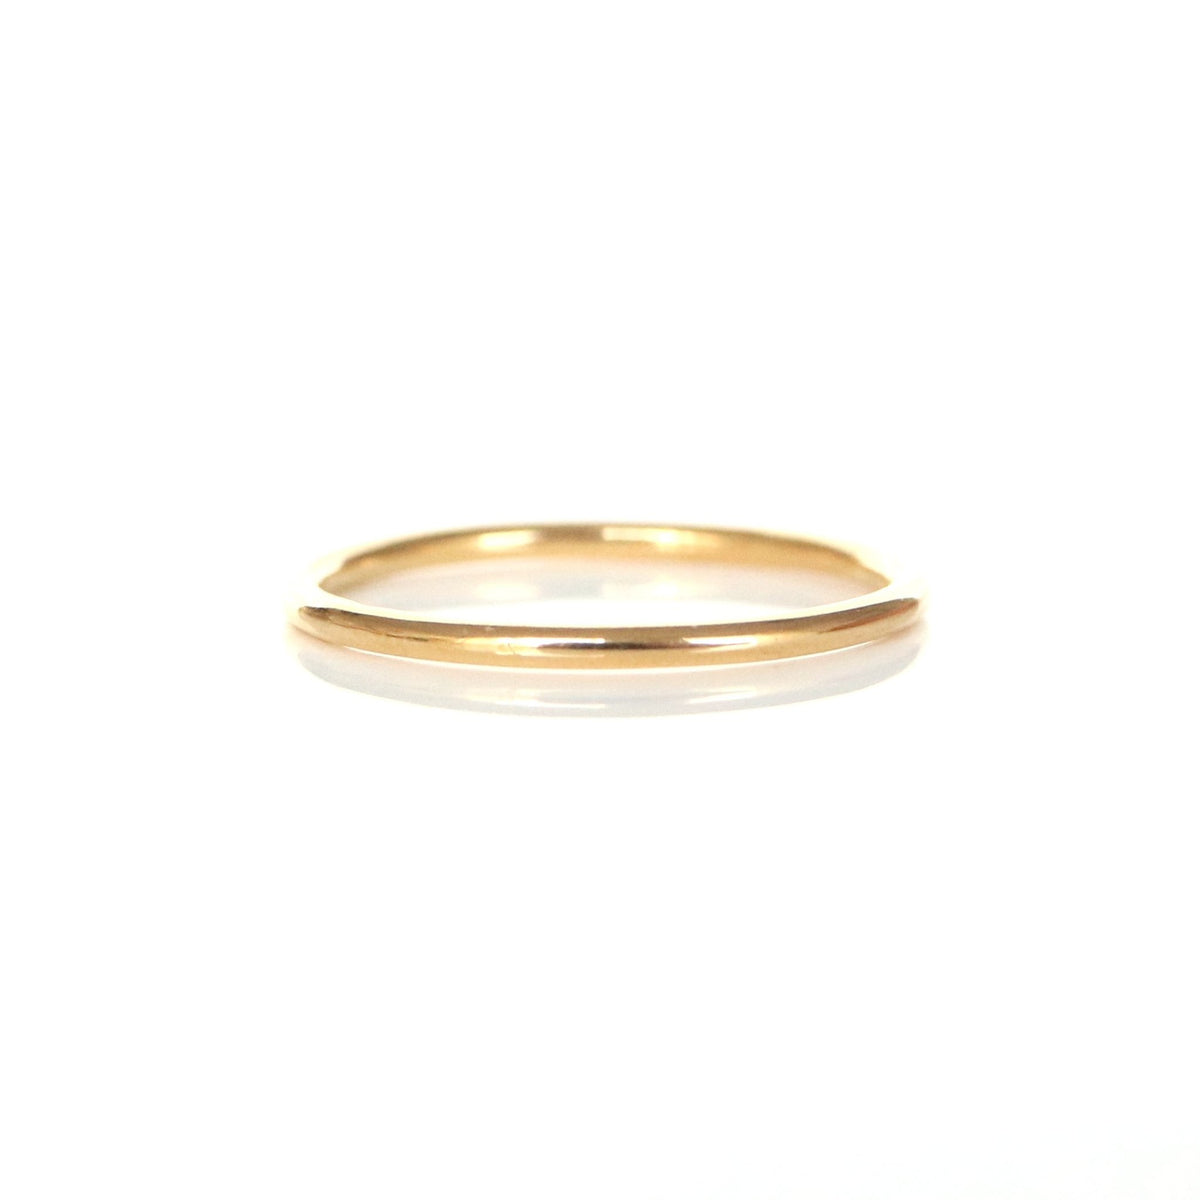 POISE THIN BAND RING - 14K SOLID GOLD - SO PRETTY CARA COTTER